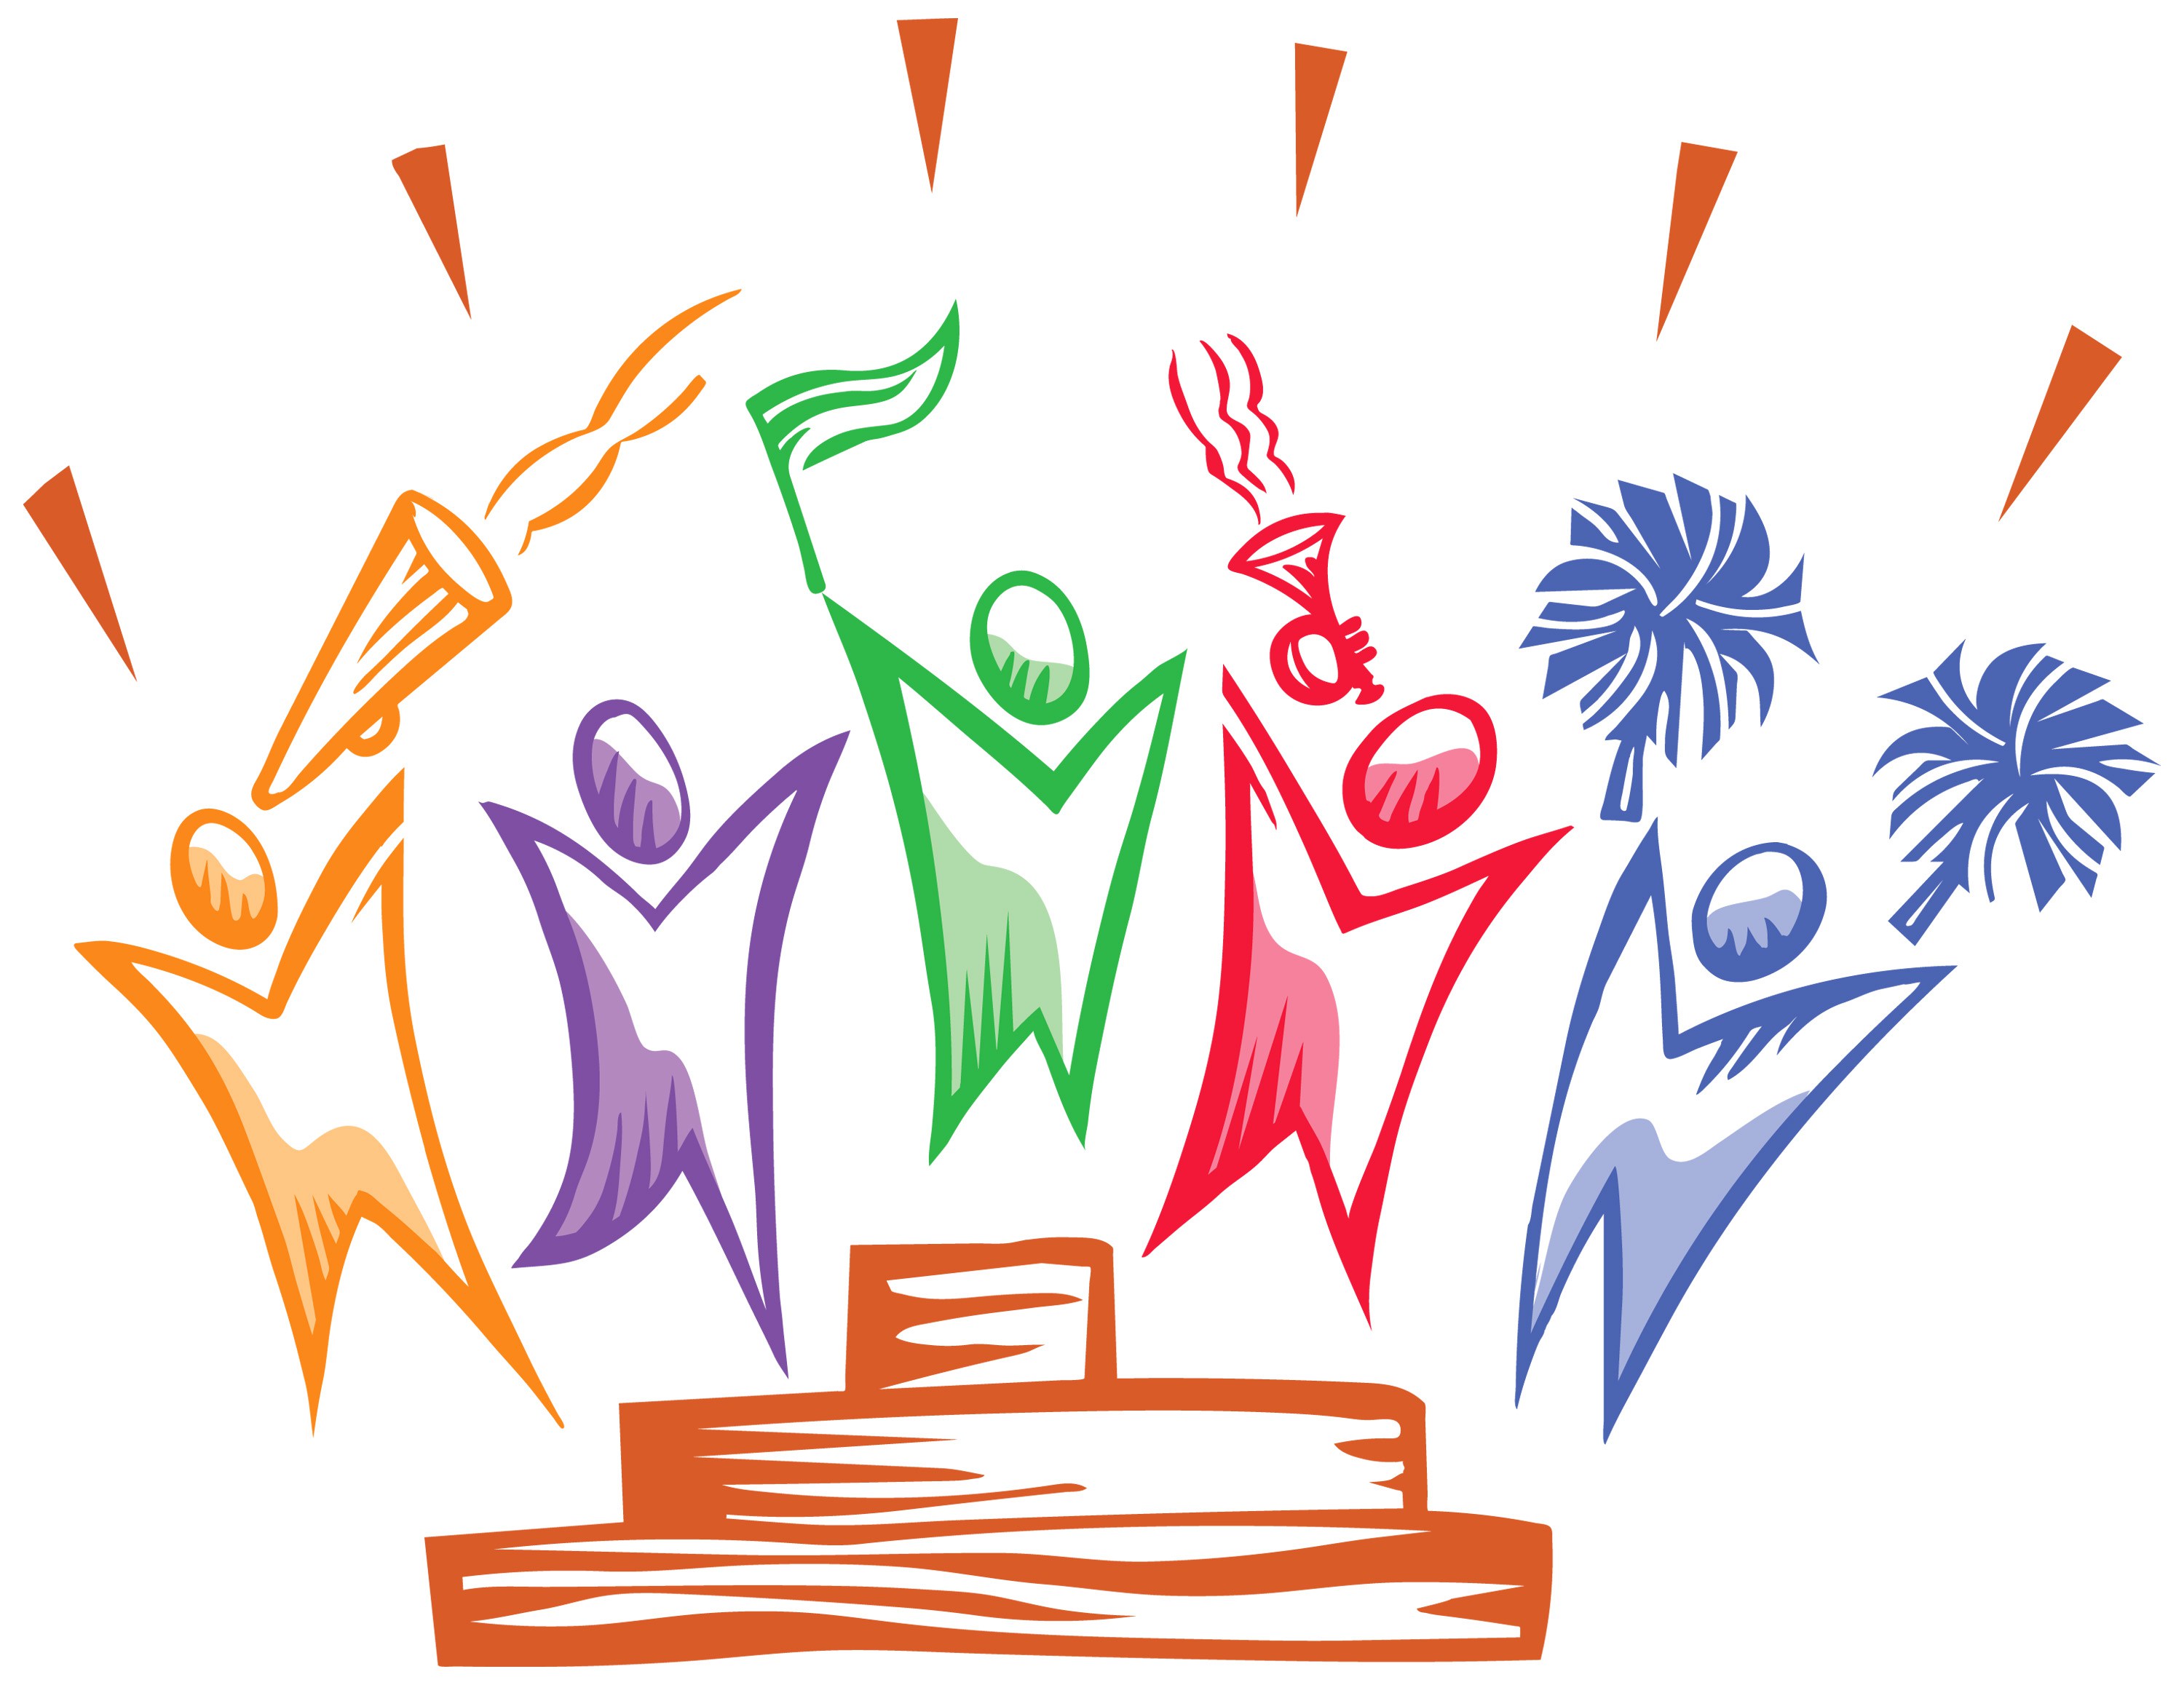 Team celebration clipart a team of celebrate the new free image #8843